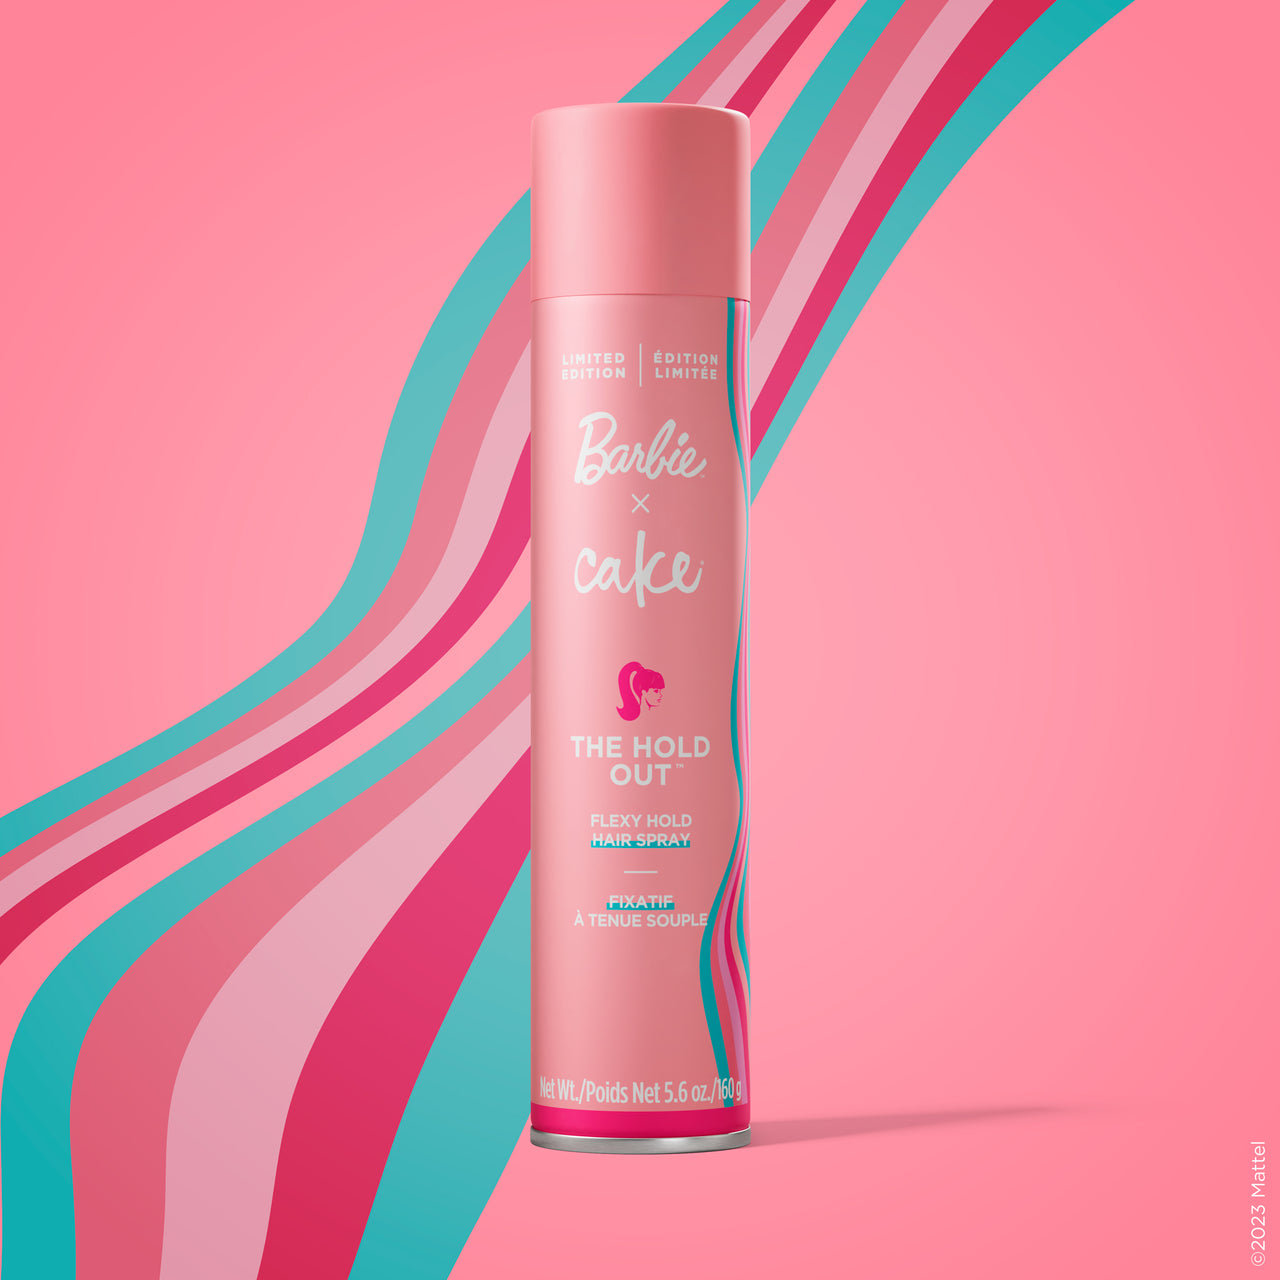 Barbie™ x Cake | The Hold Out  Flexy Hold Hair Spray, 200 mL